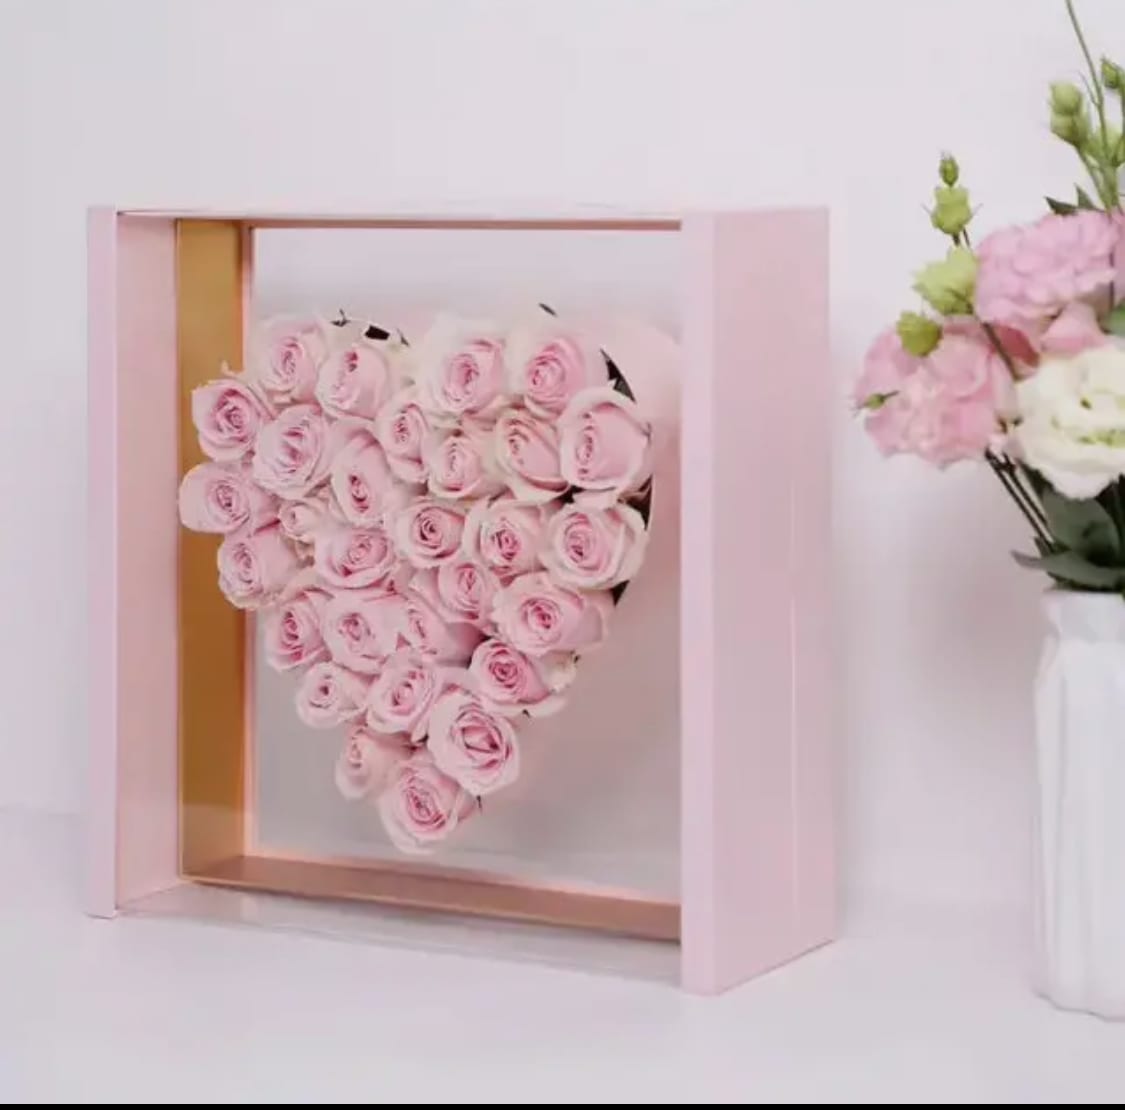 Heart Shaped Roses in an Elegant Box - Pink Roses  Dimensions: 26 cm x 26 cm x 16.5 cm